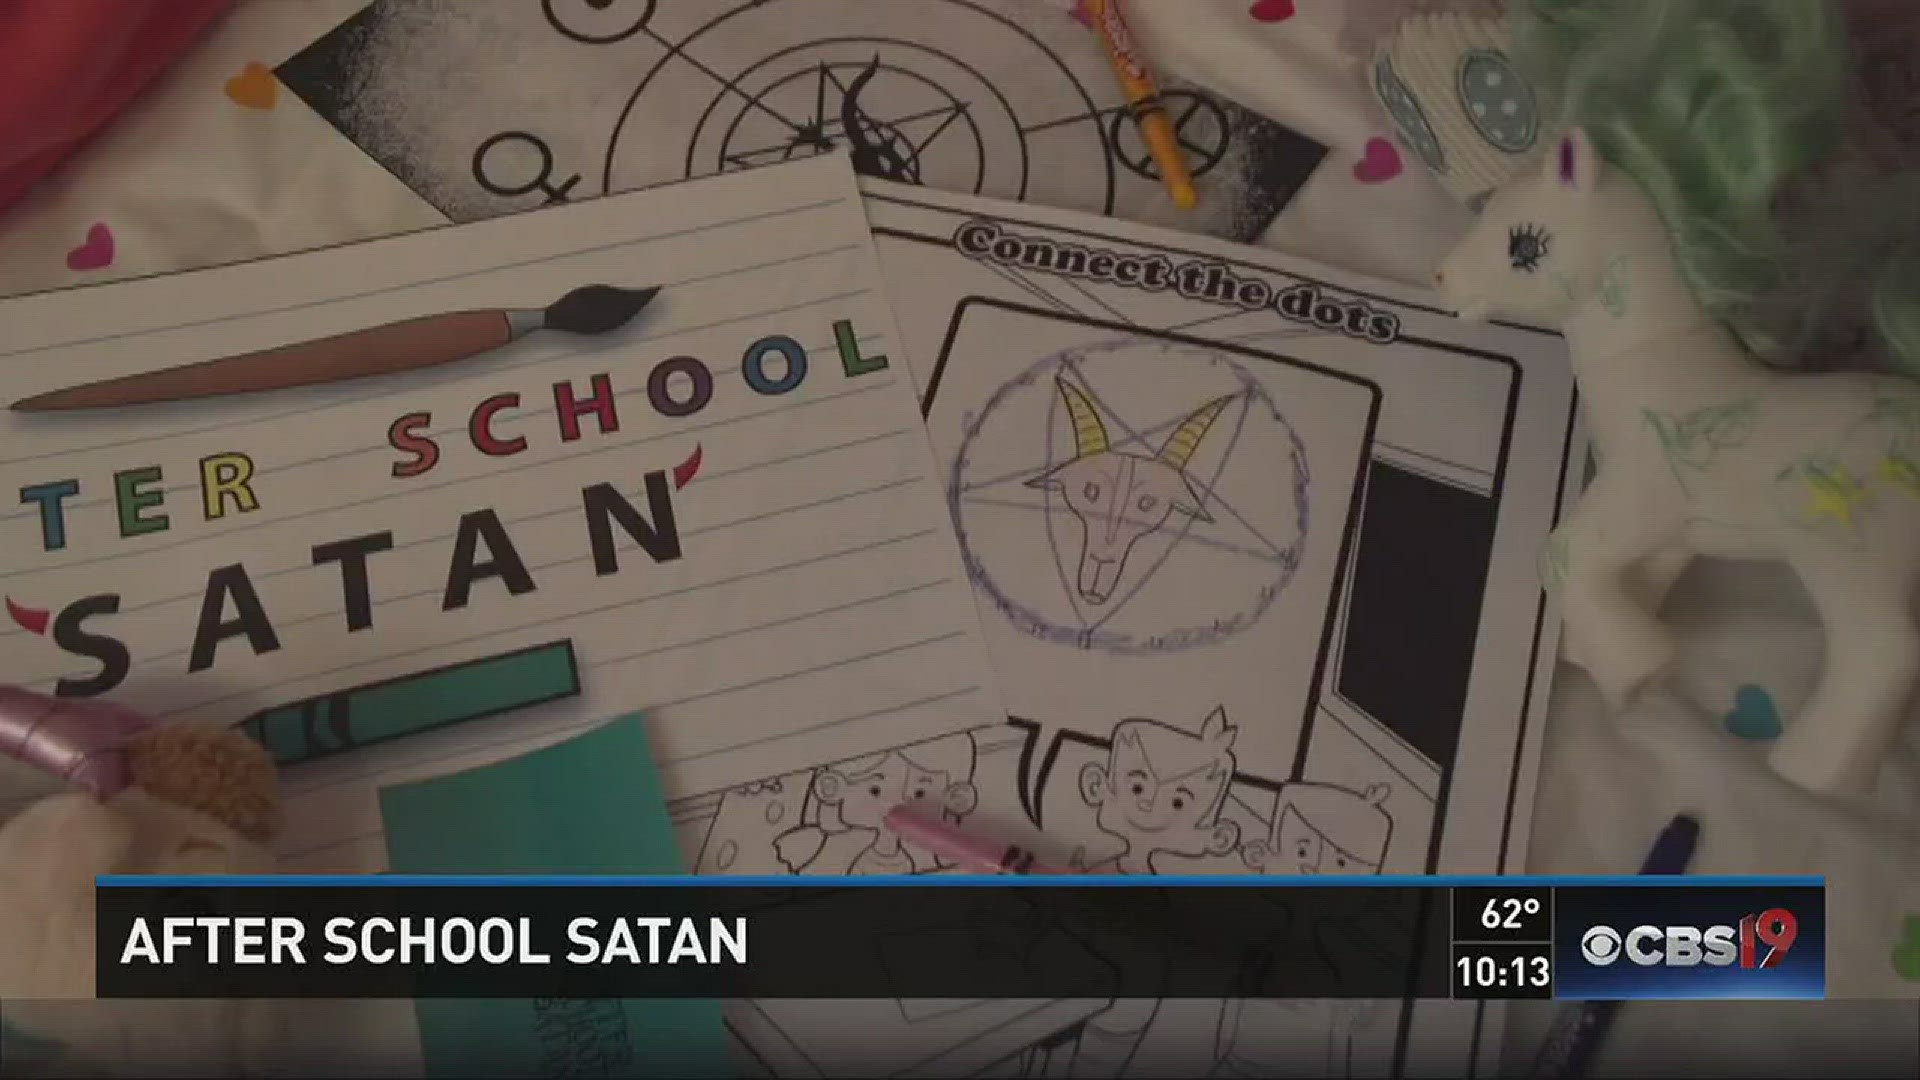 CBS19's Taeler De Haes tells us about a new after school club coming to your child's elementary school led by the Satanic Temple.